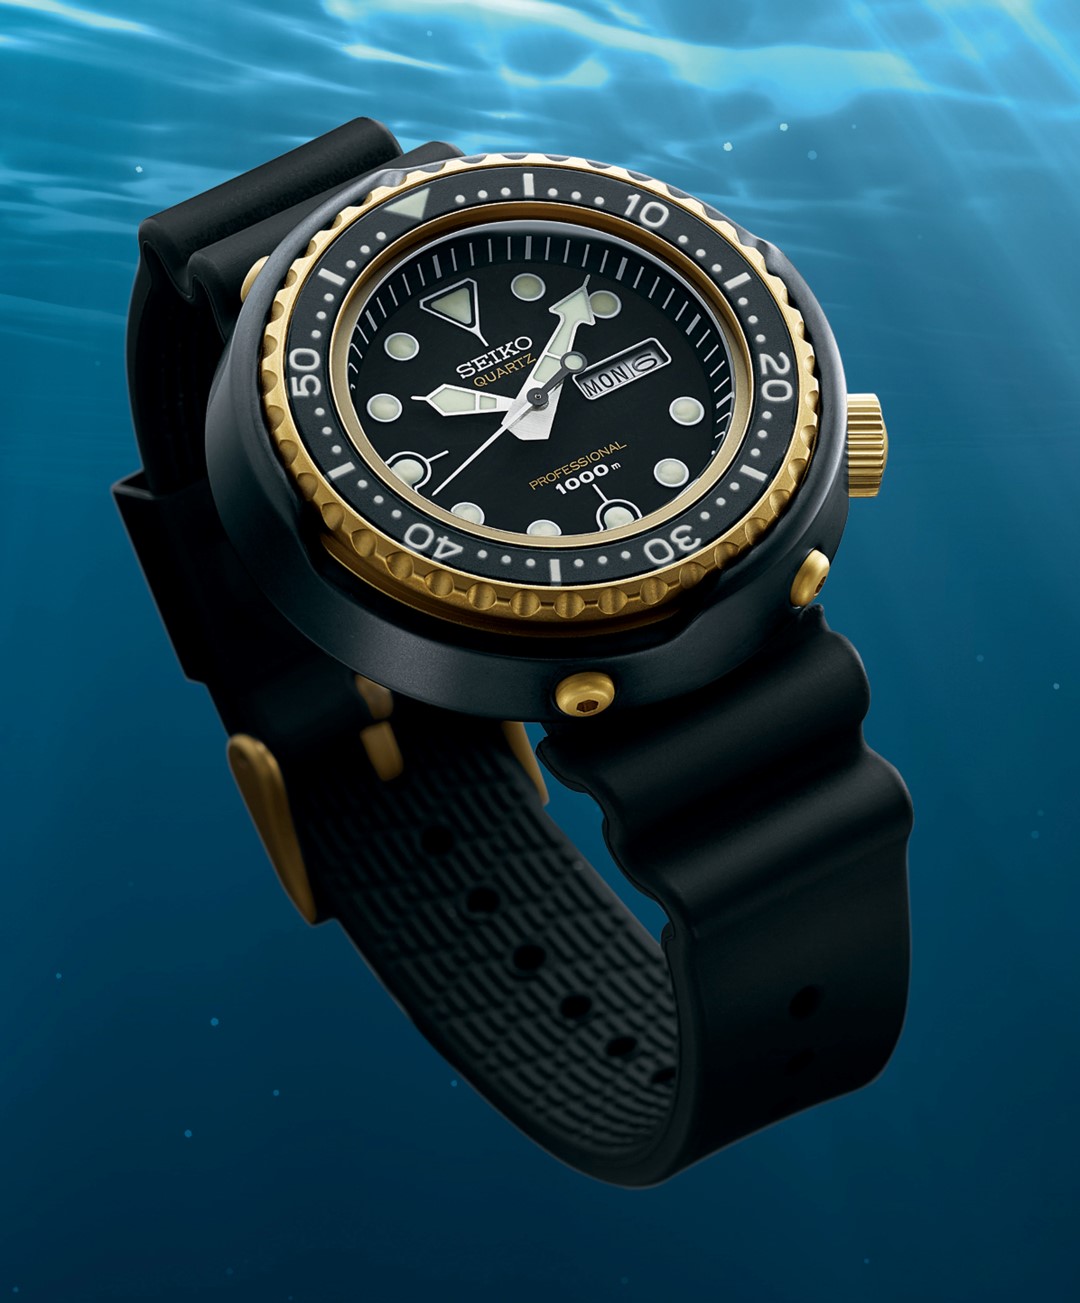 New Release: Seiko Divers for Baselworld 2018, including the new green